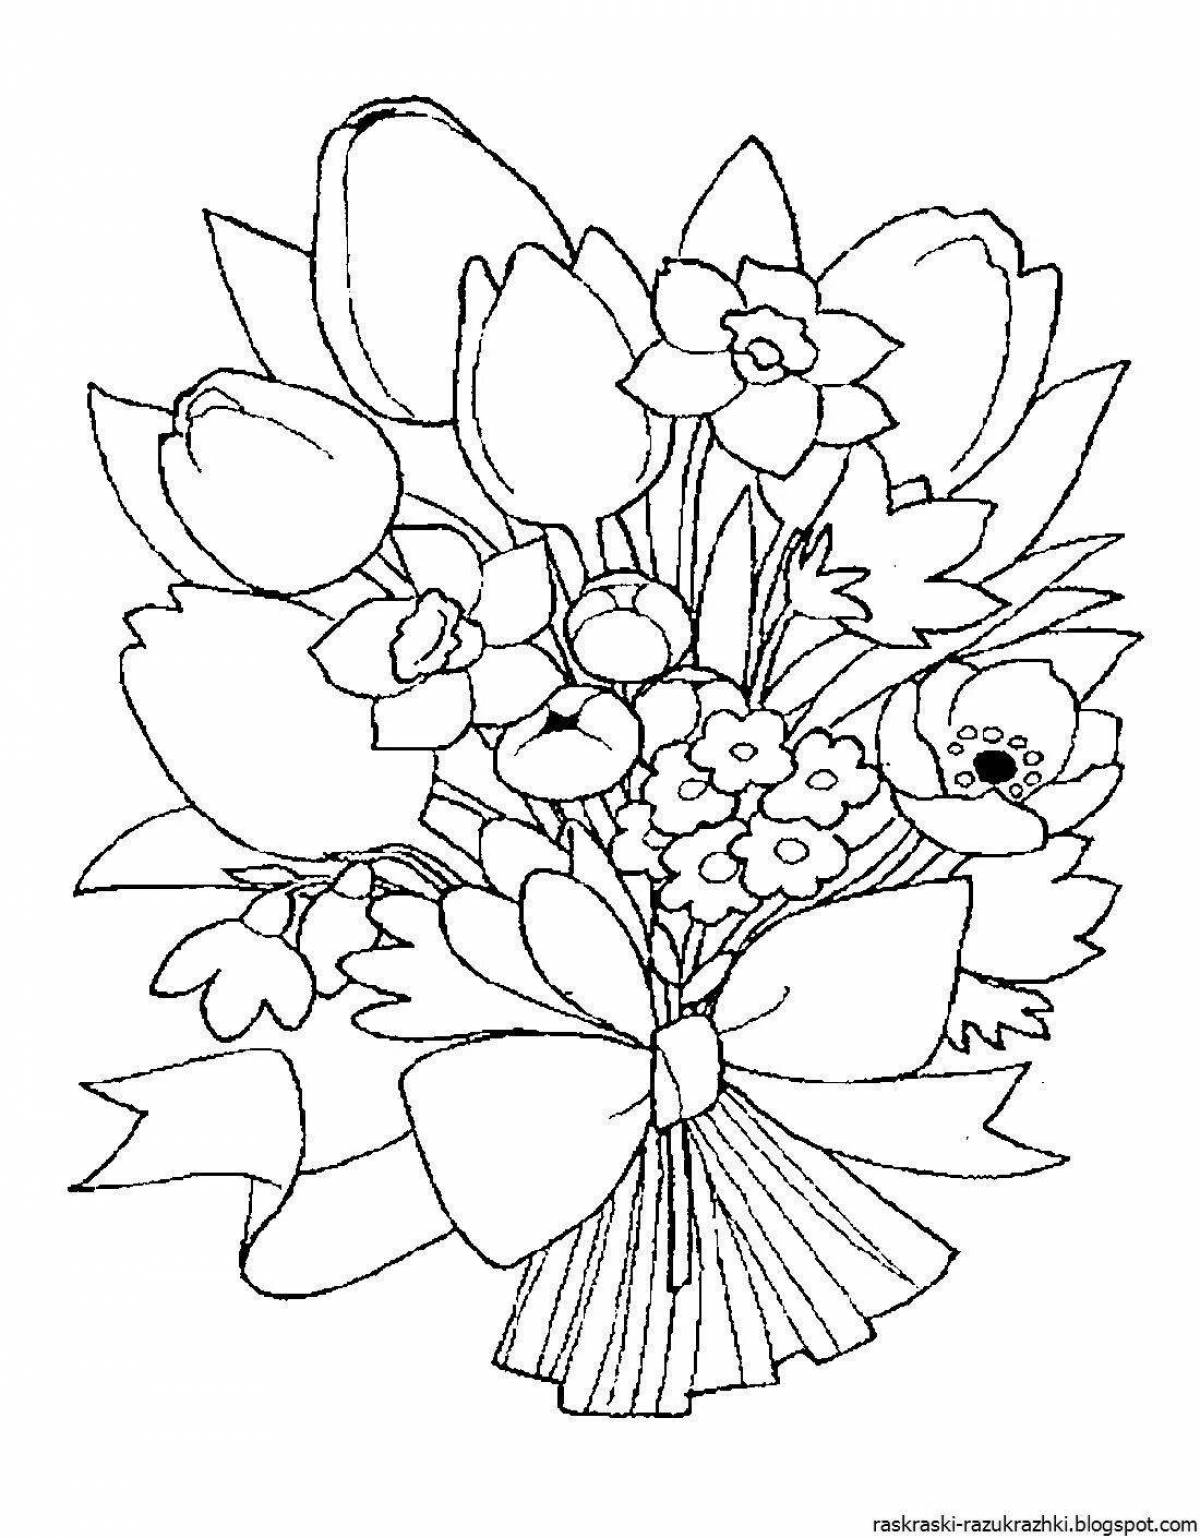 Blissful Bouquet coloring book for kids